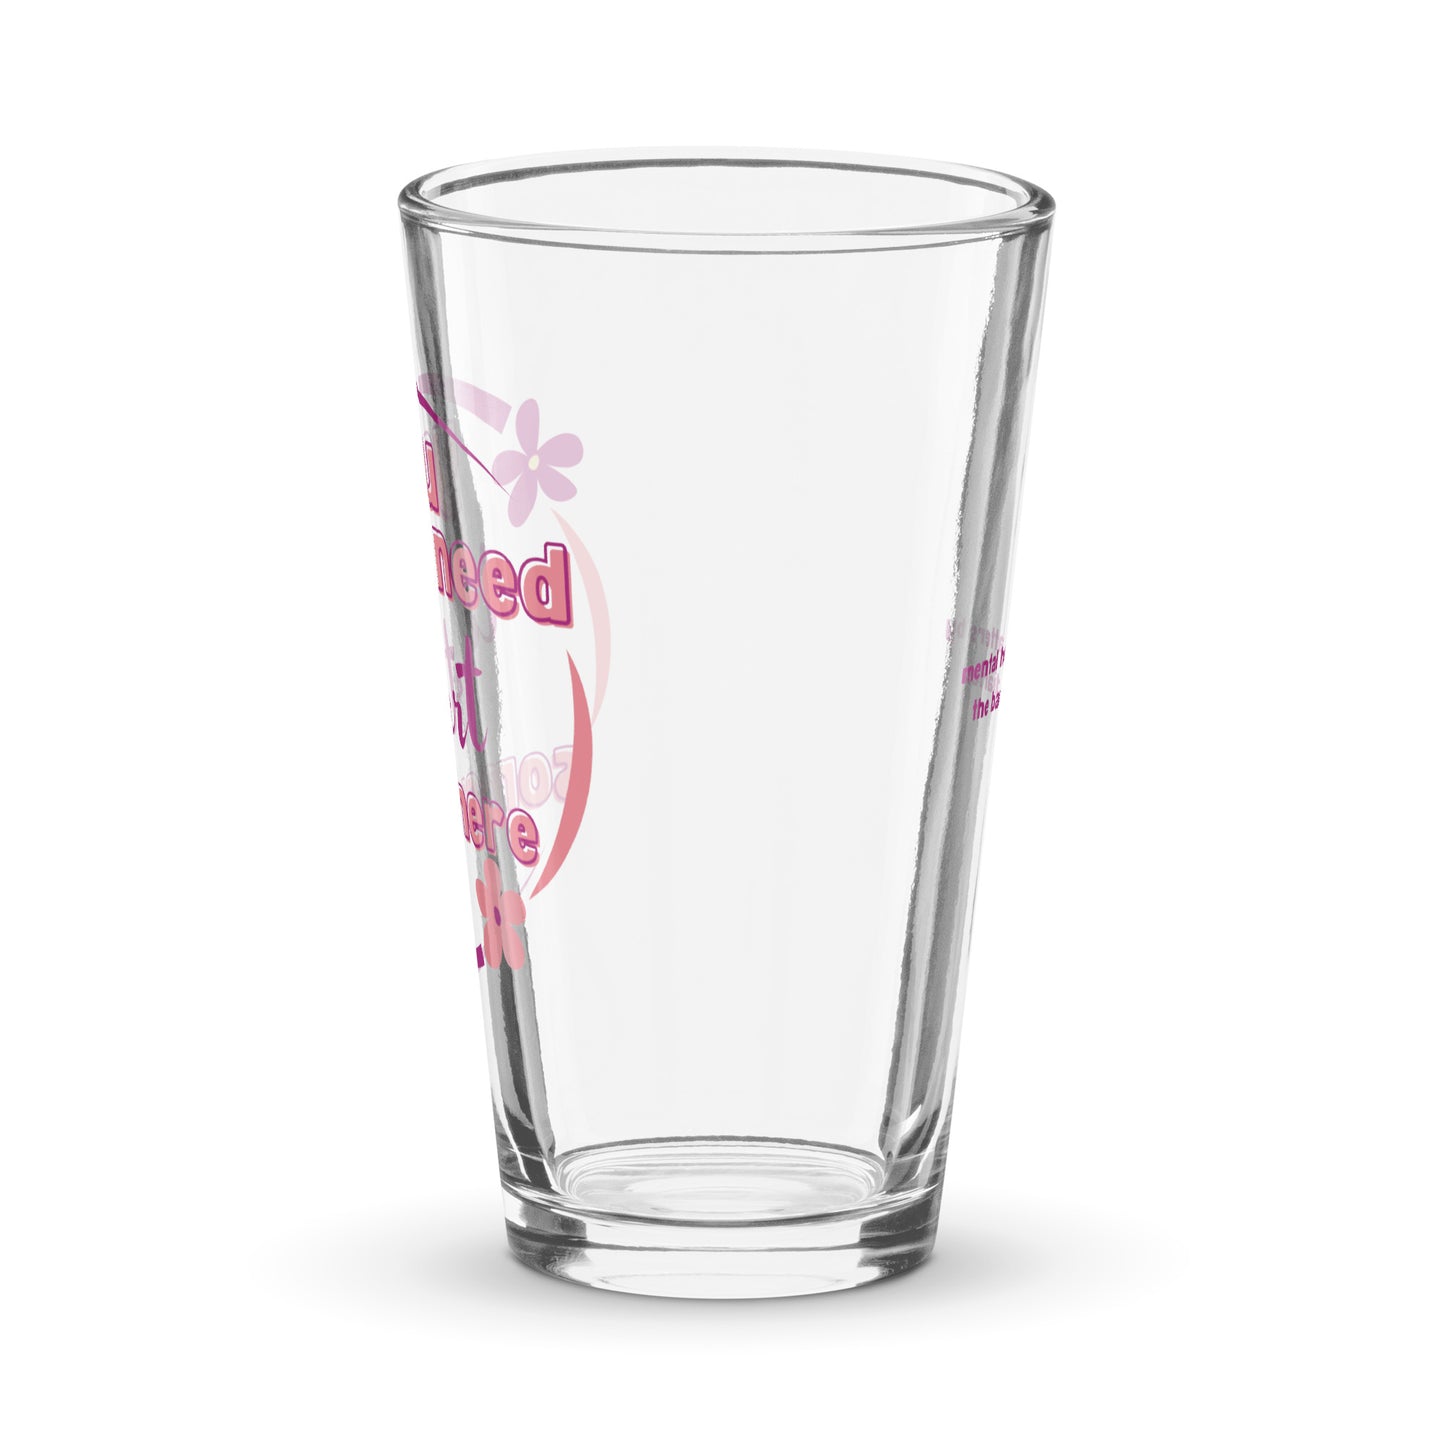 You Need to Start Somewhere Pint Glass - Mental Health Matters by The Banannie Diaries - Volume: 16 oz. (473 ml), Glassware, Houseware